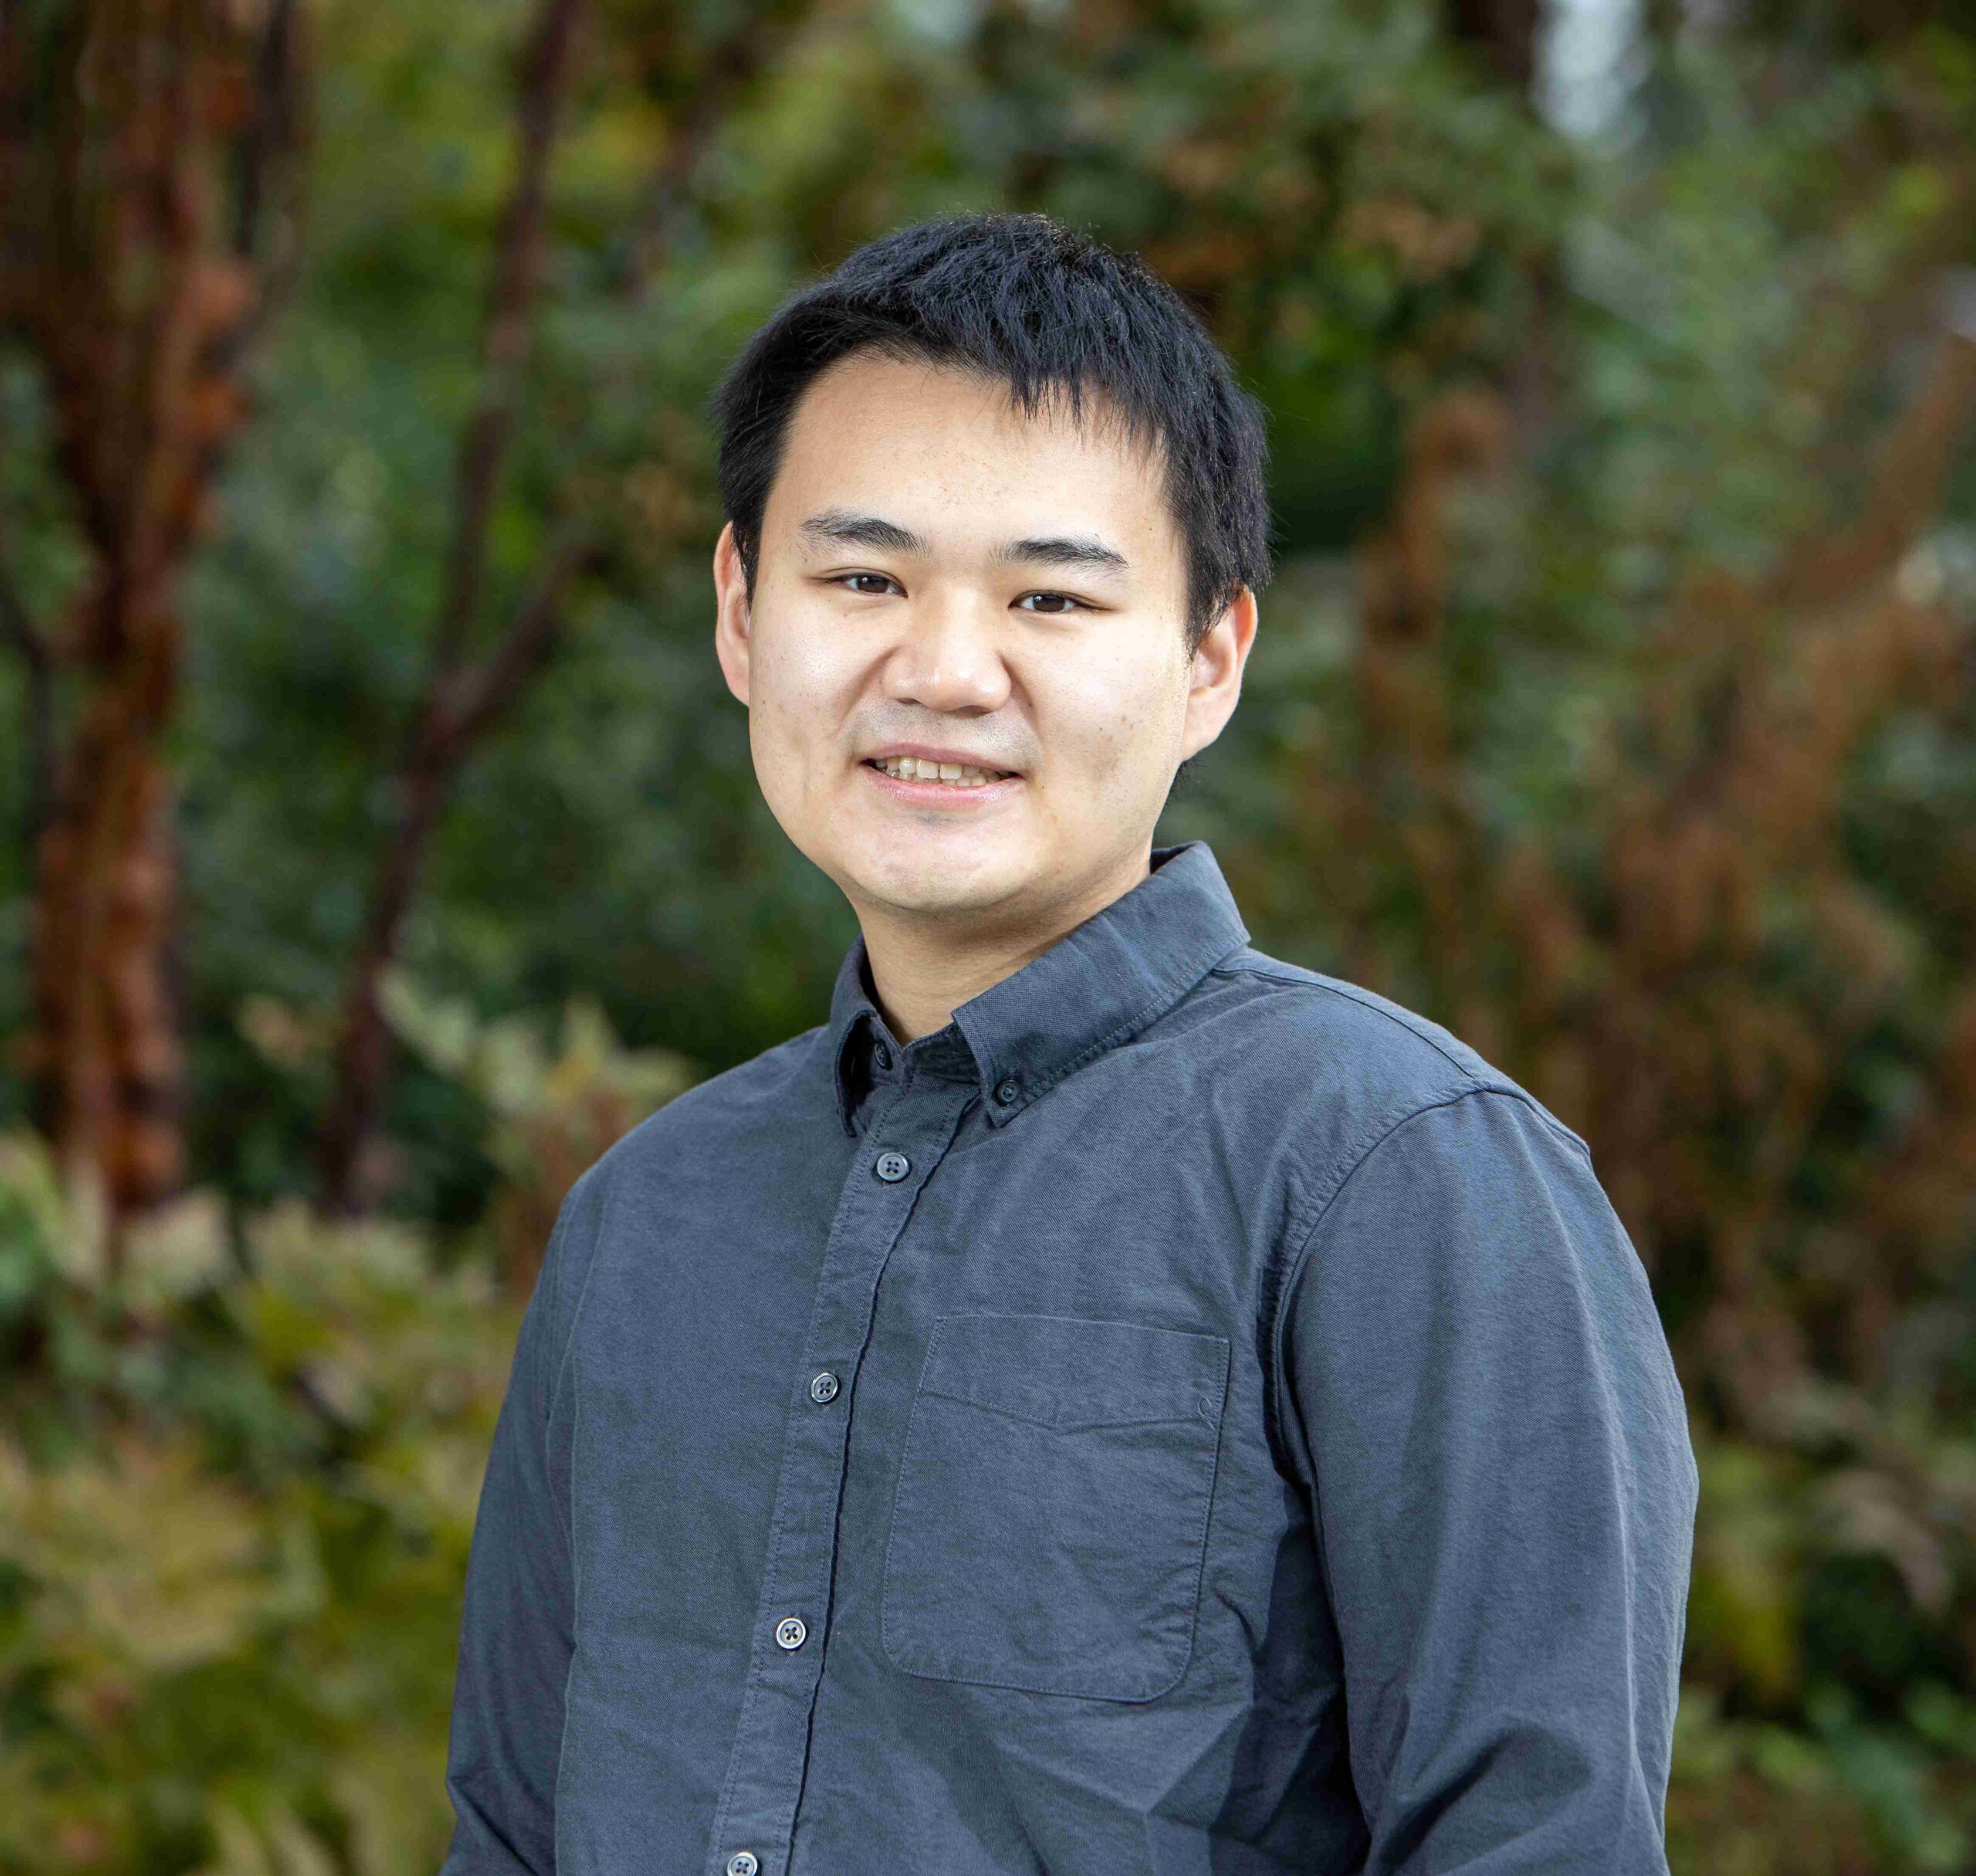 Simon Du, wearing a navy blue shirt, smiles while standing in front of a wooded background.